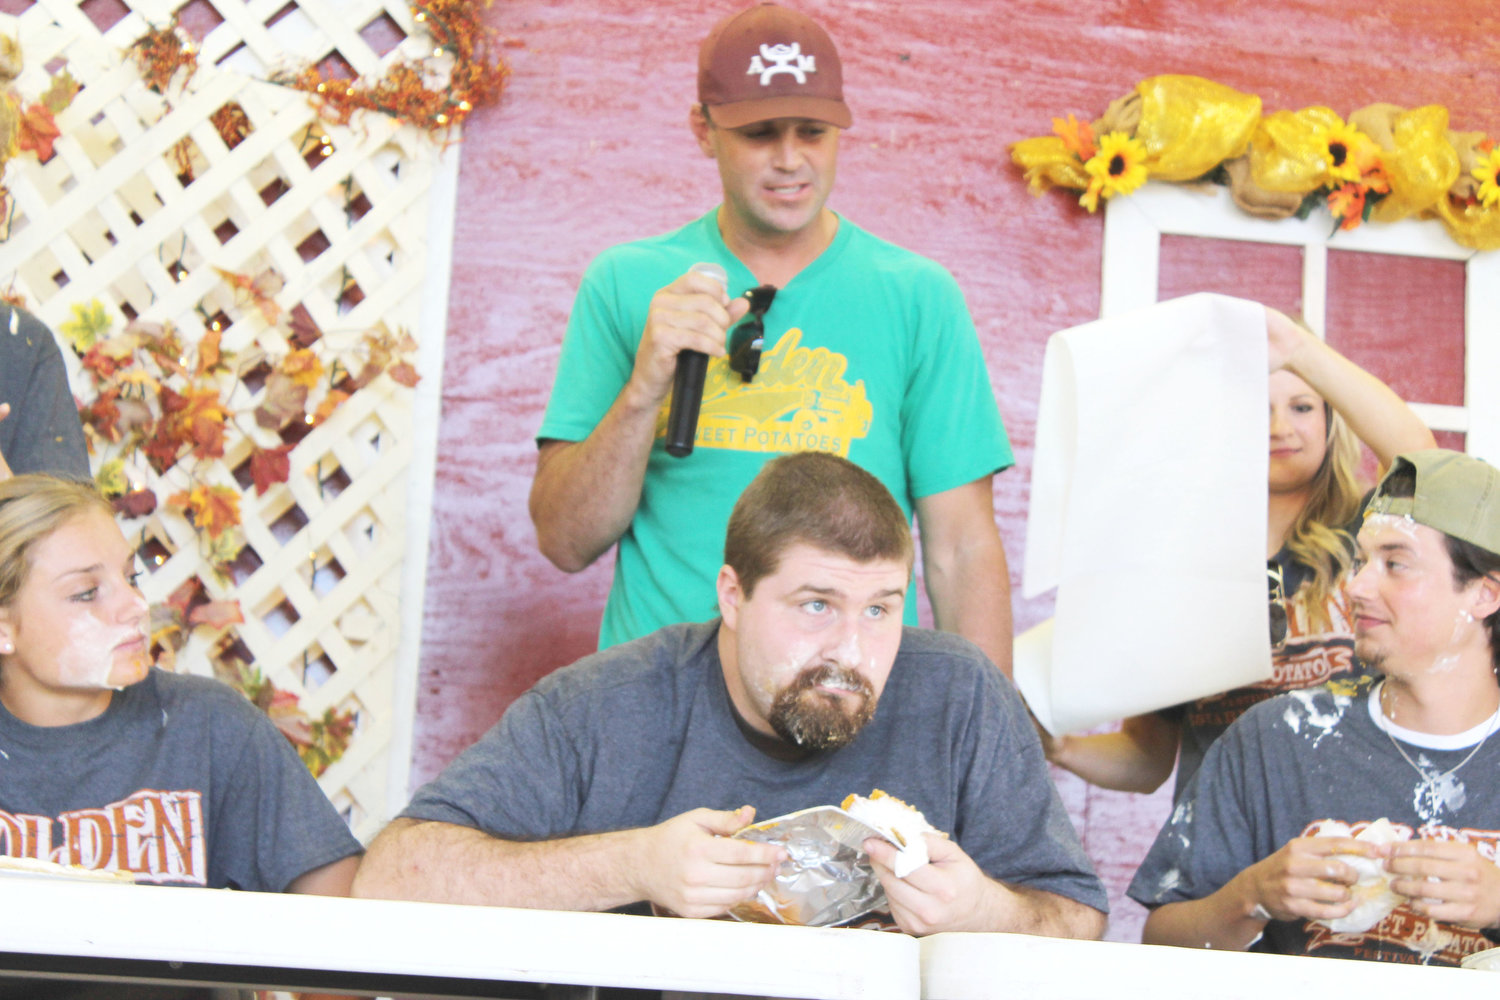 Clint Bittner devoured the sweet potato pie before any of his competition in Saturday’s Pie Eating Contest. It was a messy affair and contestants didn’t get to use forks but Bittner out-distanced the competition. To his left is Caitlin Lennon, and his right is Blake Hambrick. Behind him is coordinator of the event, Grant Sadler.